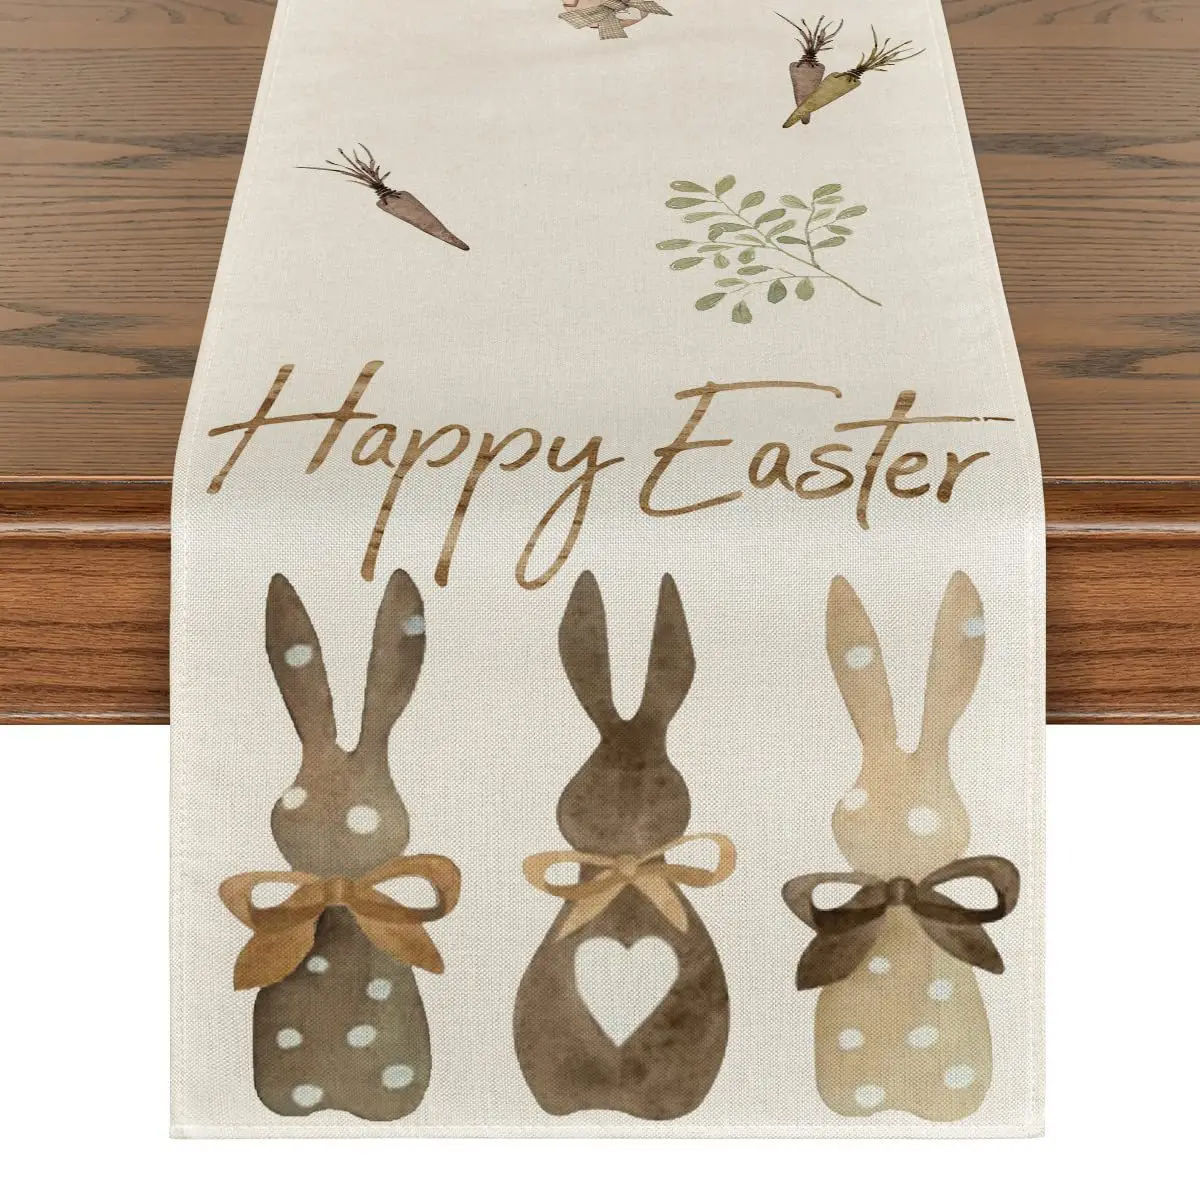 

Spring Summer Seasonal Holiday Kitchen Dining Table Decortion Carrots Rabbit Bunny Happy Easter Table Runner with Placemat,